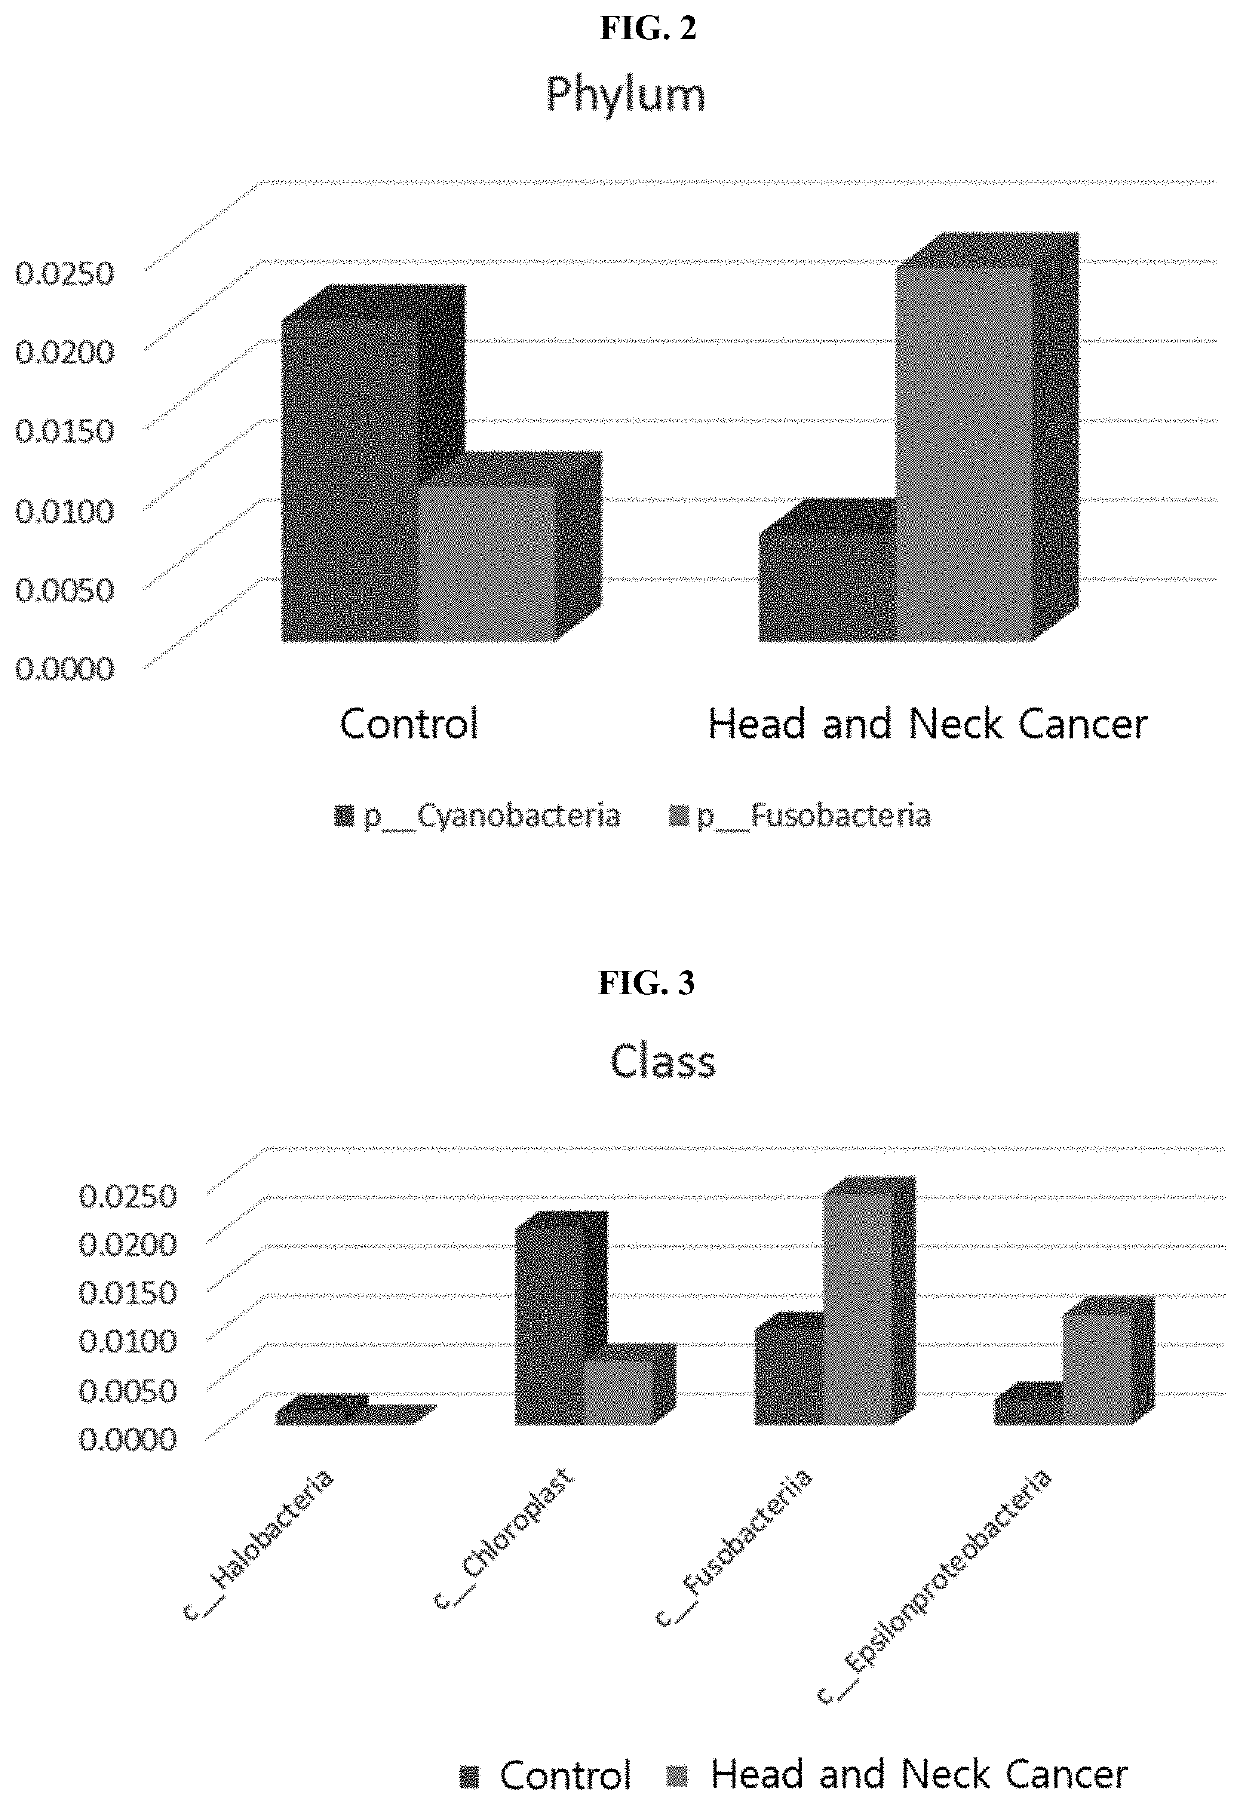 Method for diagnosing head and neck cancer via bacterial metagenomic analysis